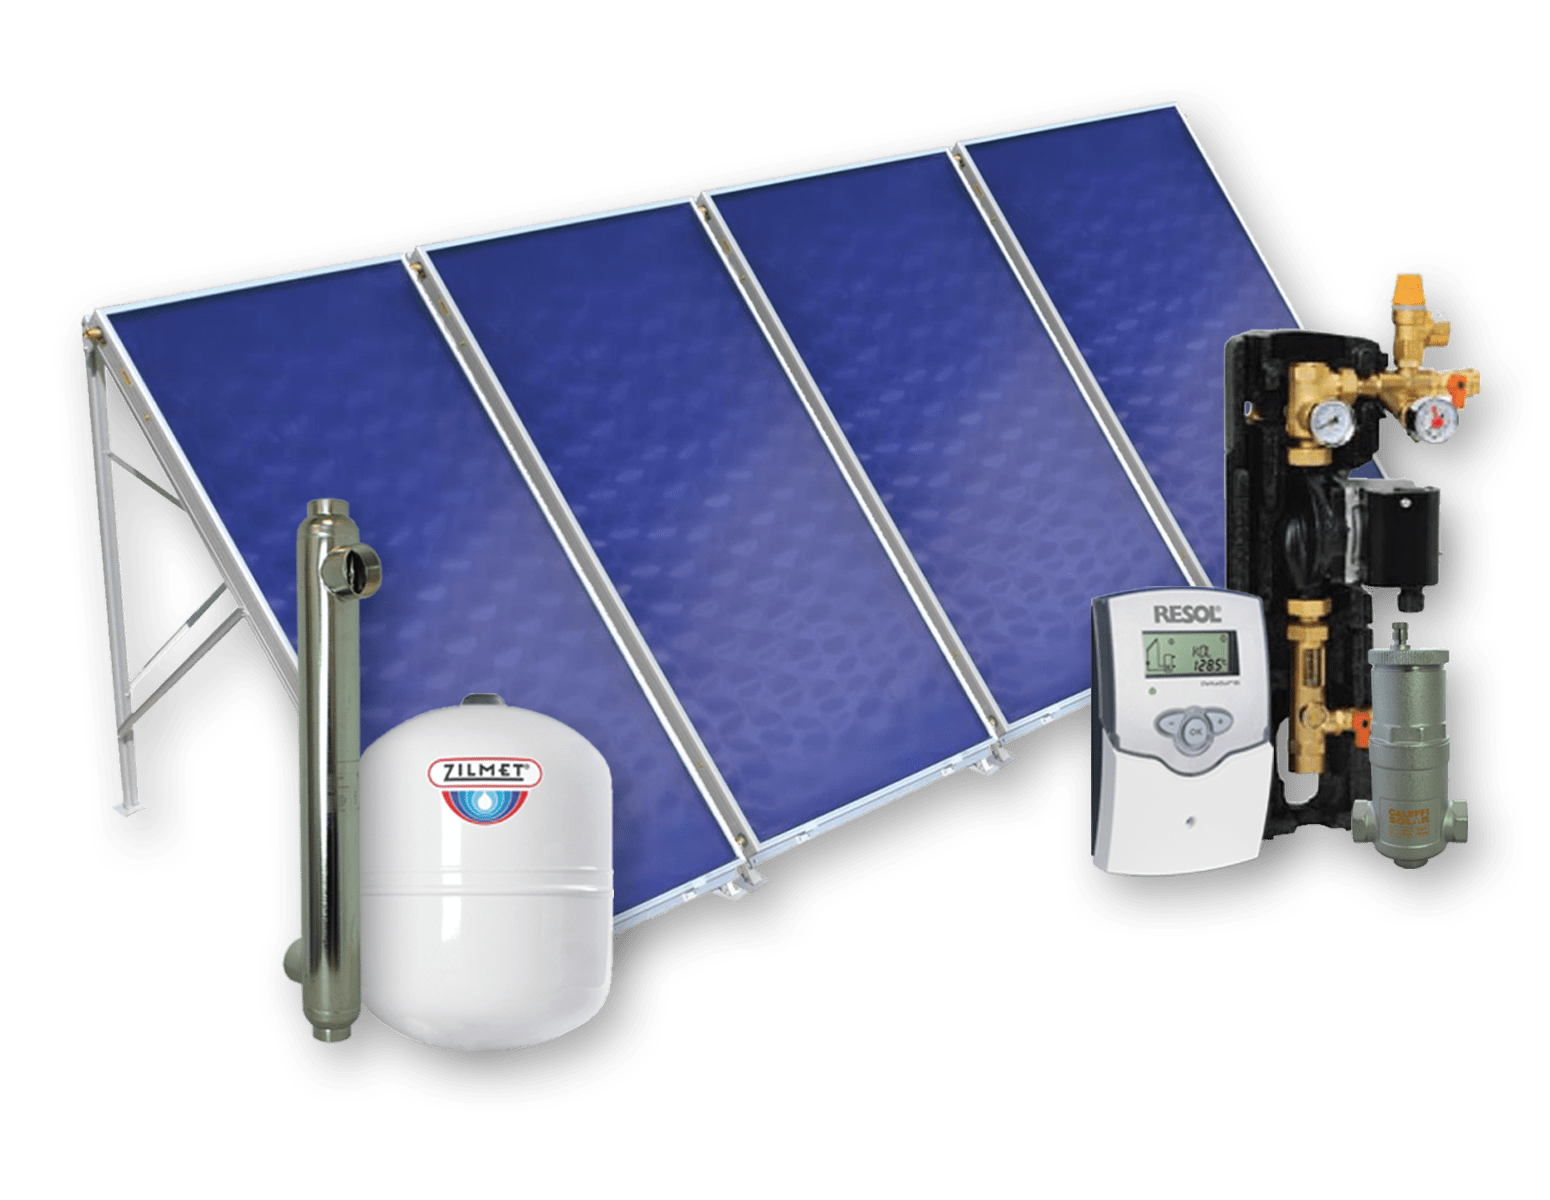 Thermax Extreme Solar Pool Heater - 4 Panel